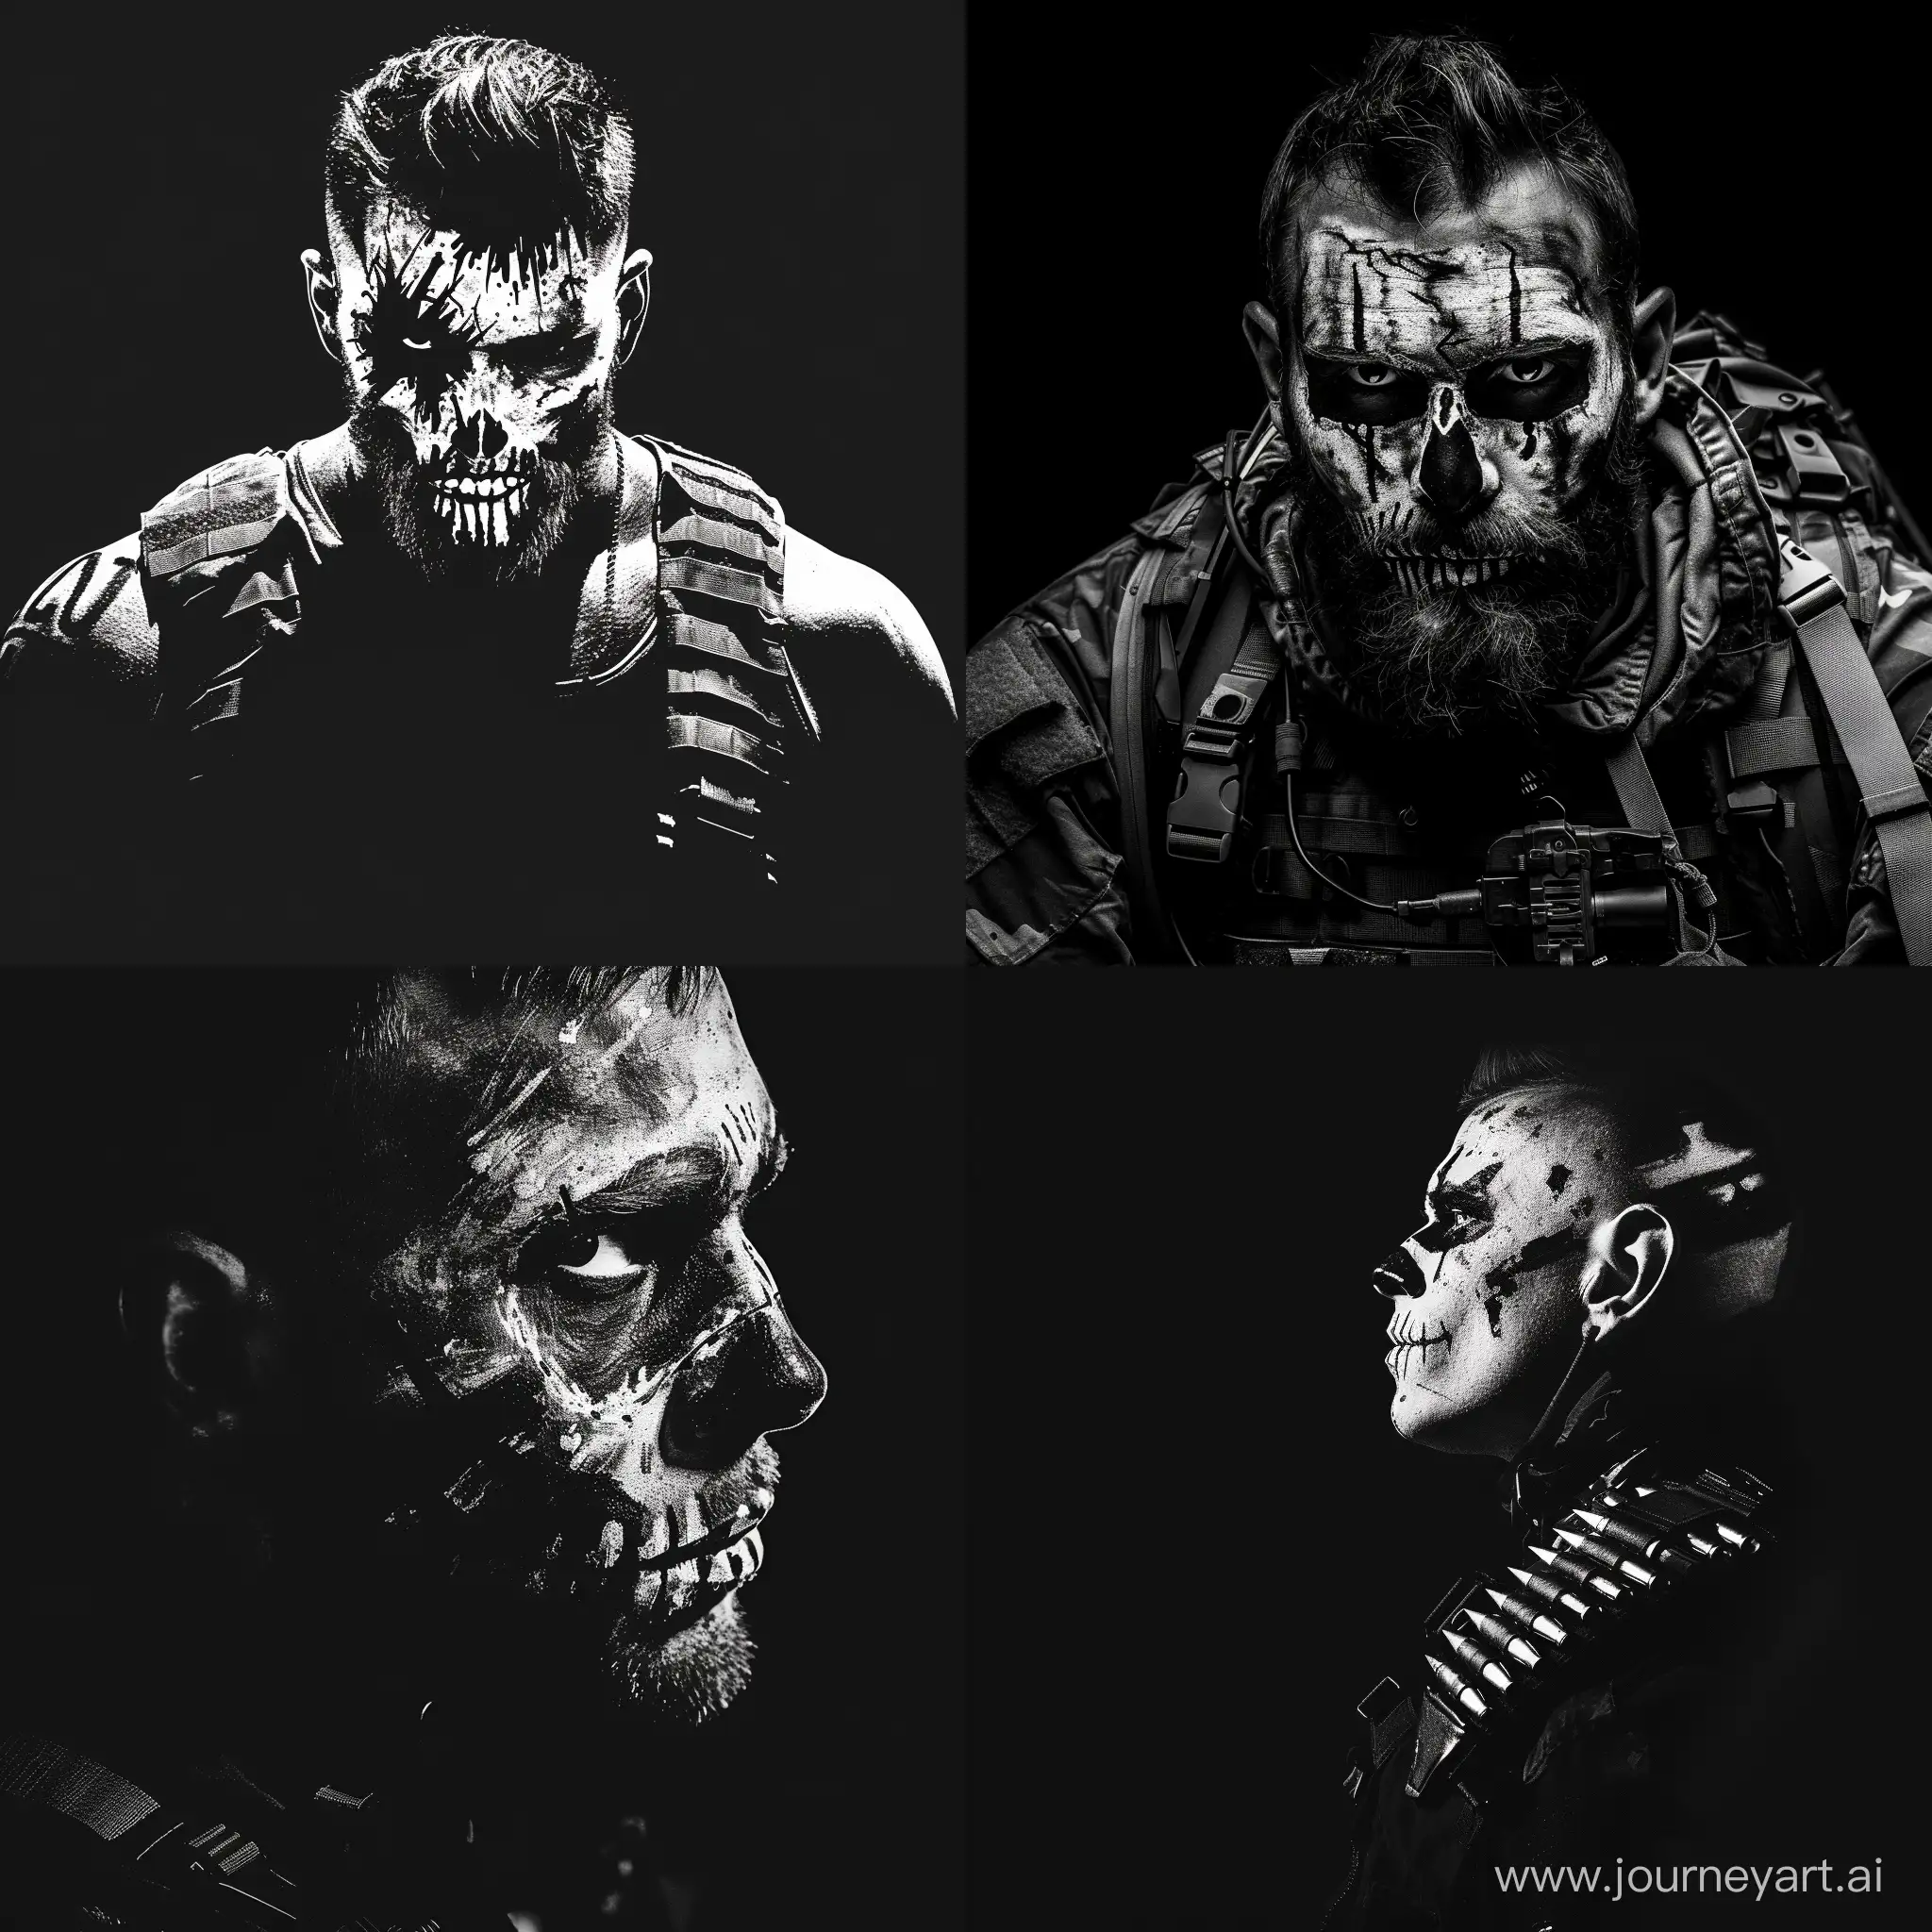 logo, minimalistic, man, crudely painted skull war paint, military equipment, black and white, black background